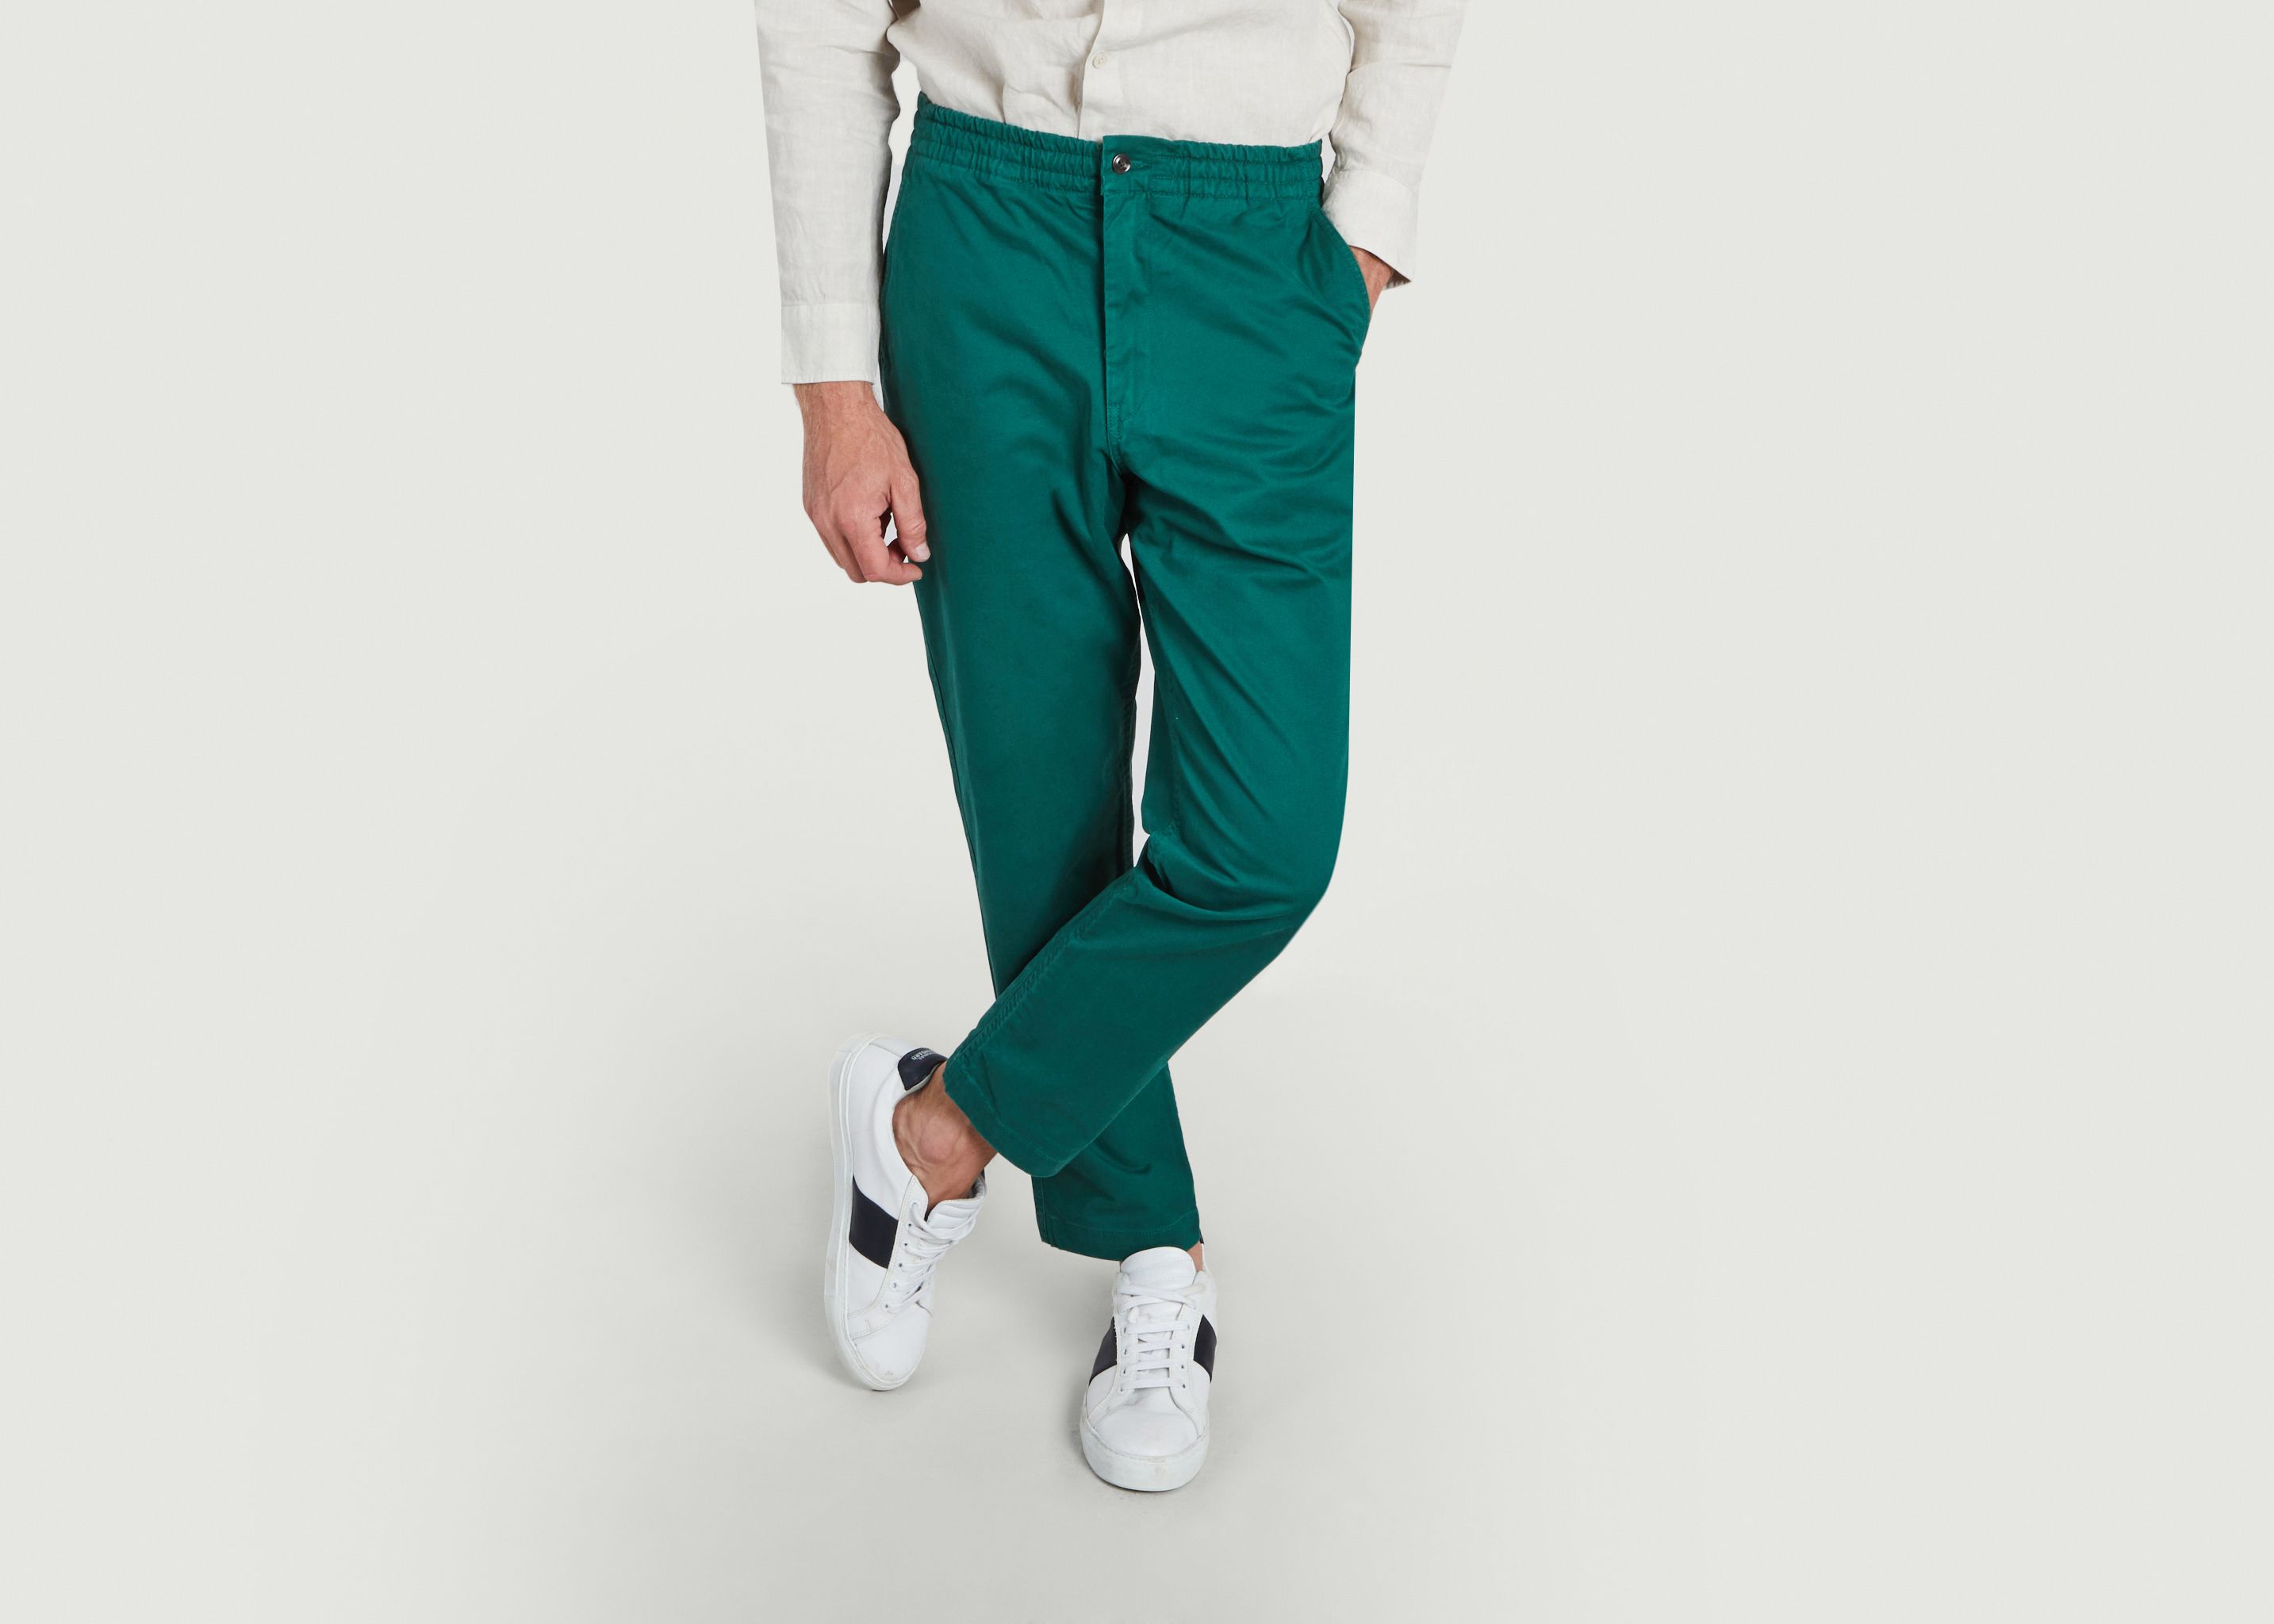 Classic Fit Stretch Pants with elastic waistband - Polo Ralph Lauren